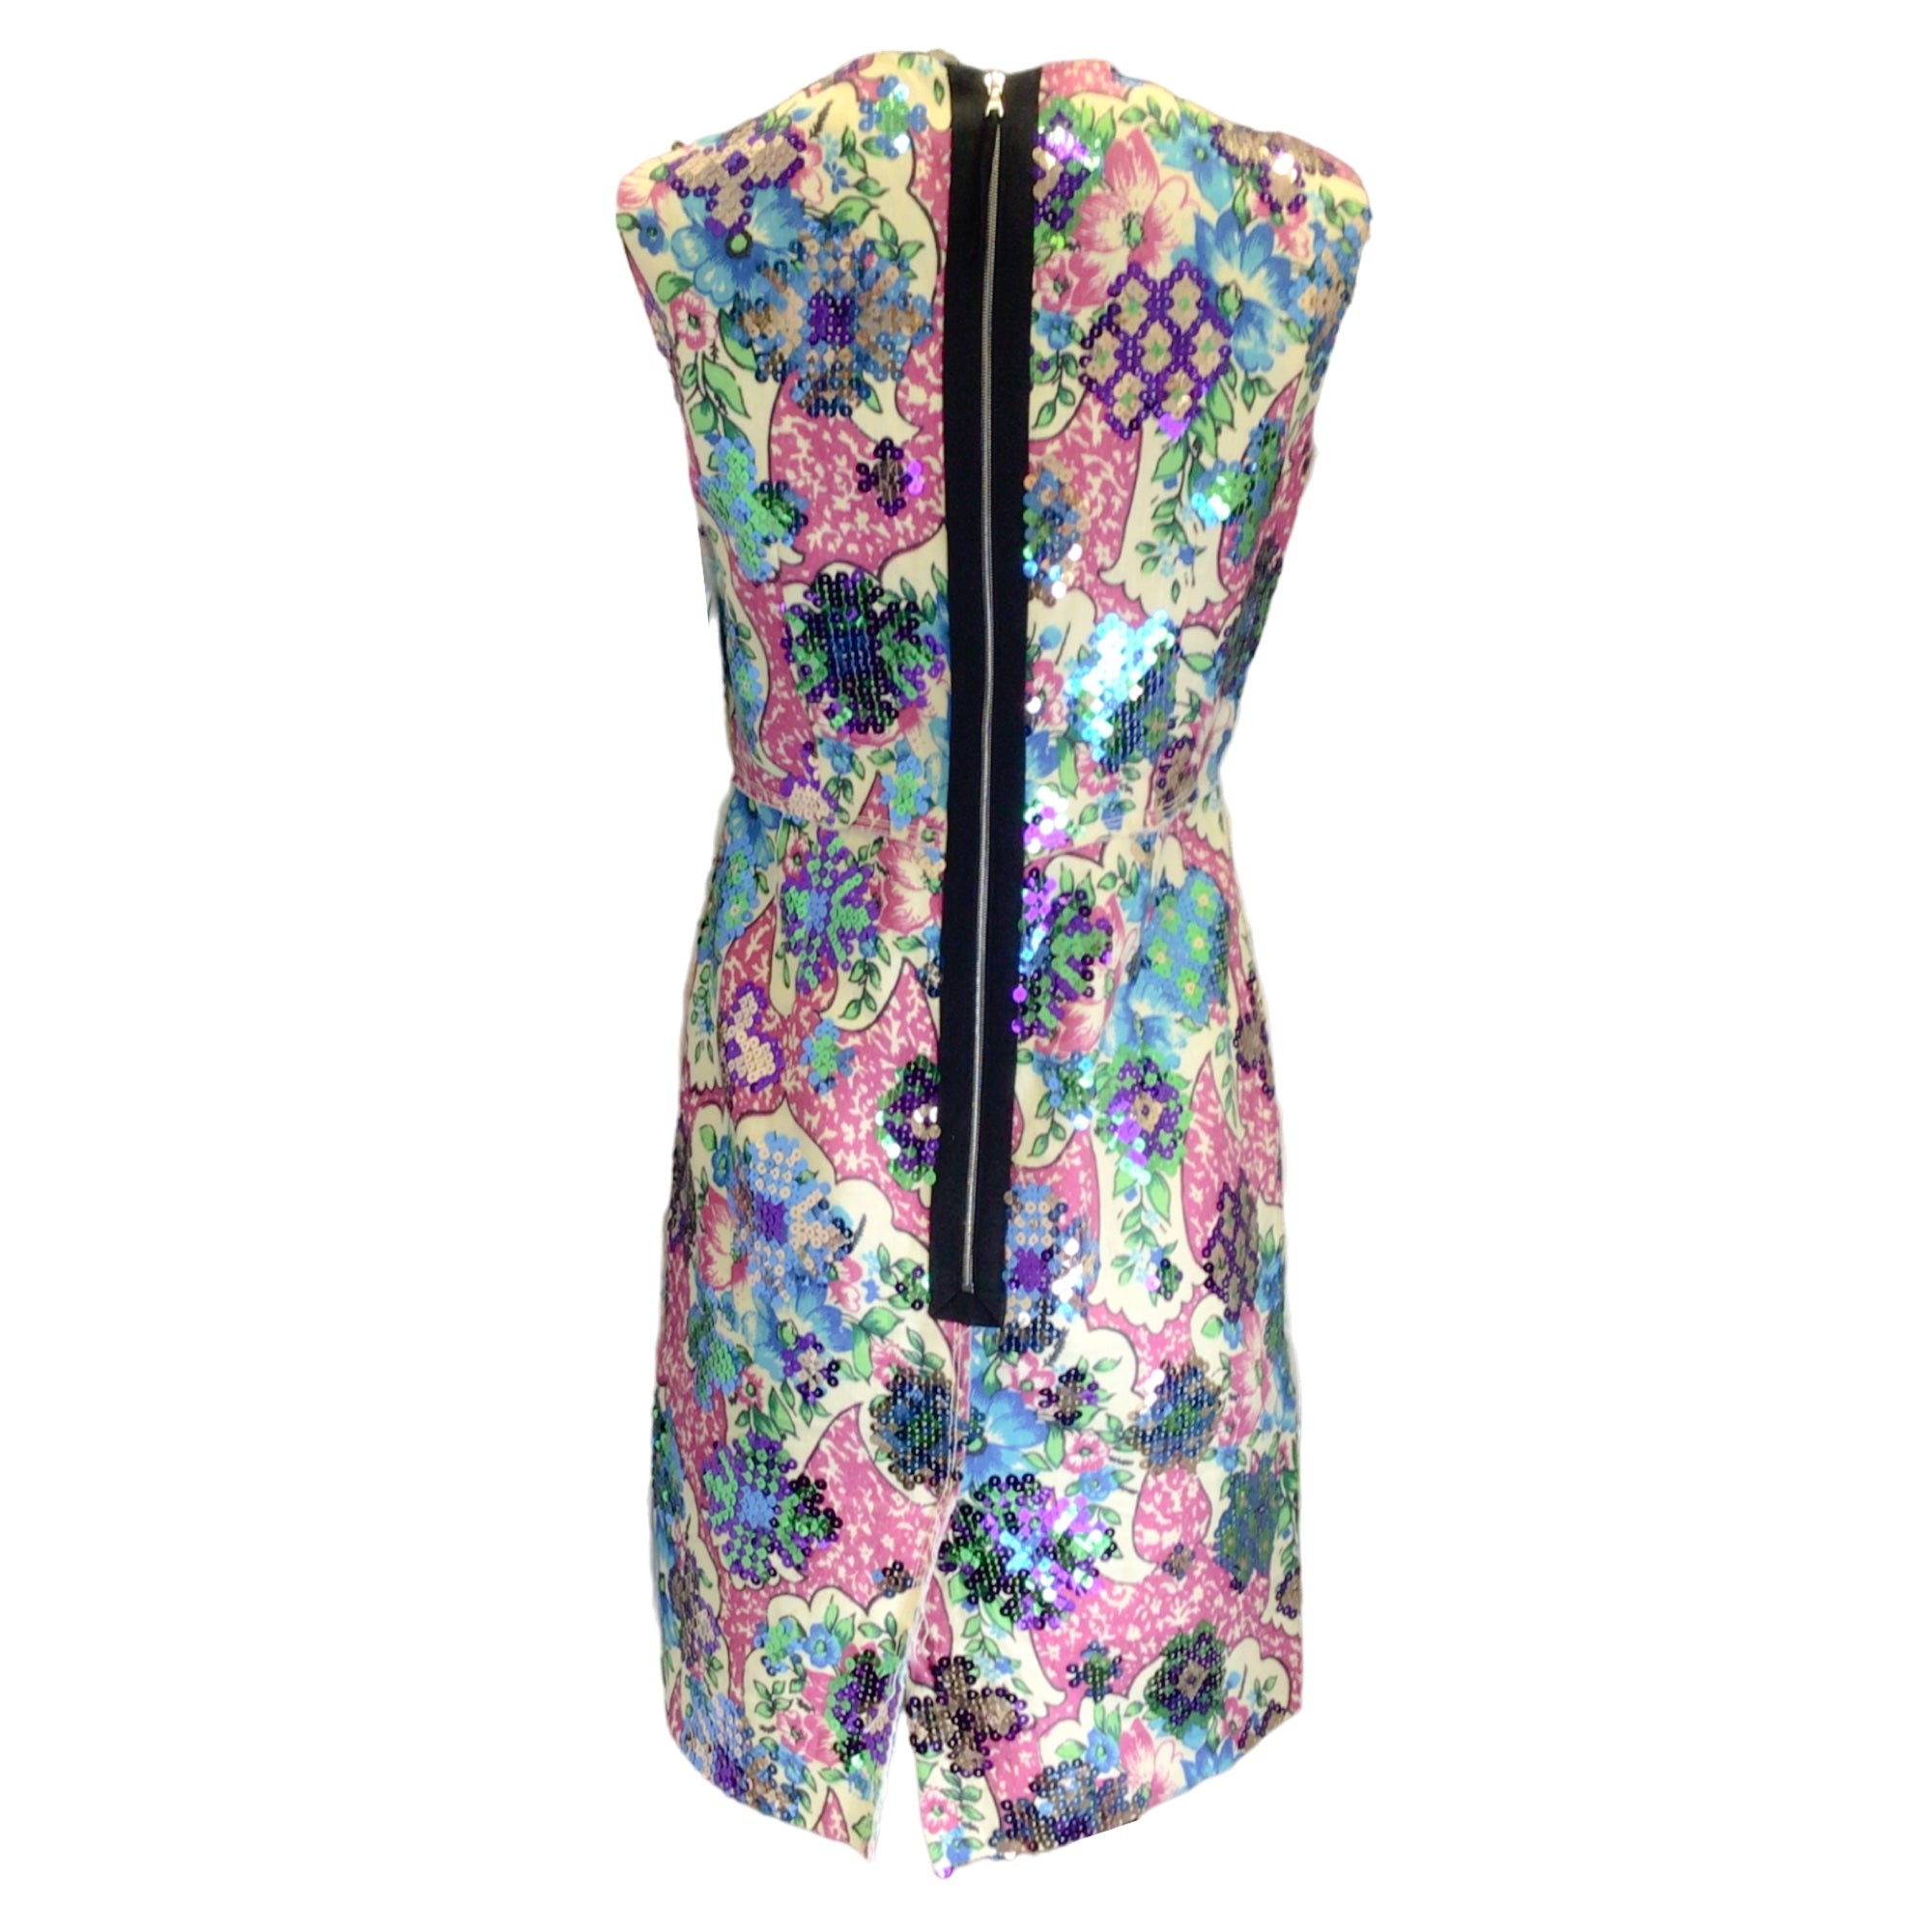 Marc Jacobs Multicolored Sequined Floral Printed Sleeveless Linen Dress